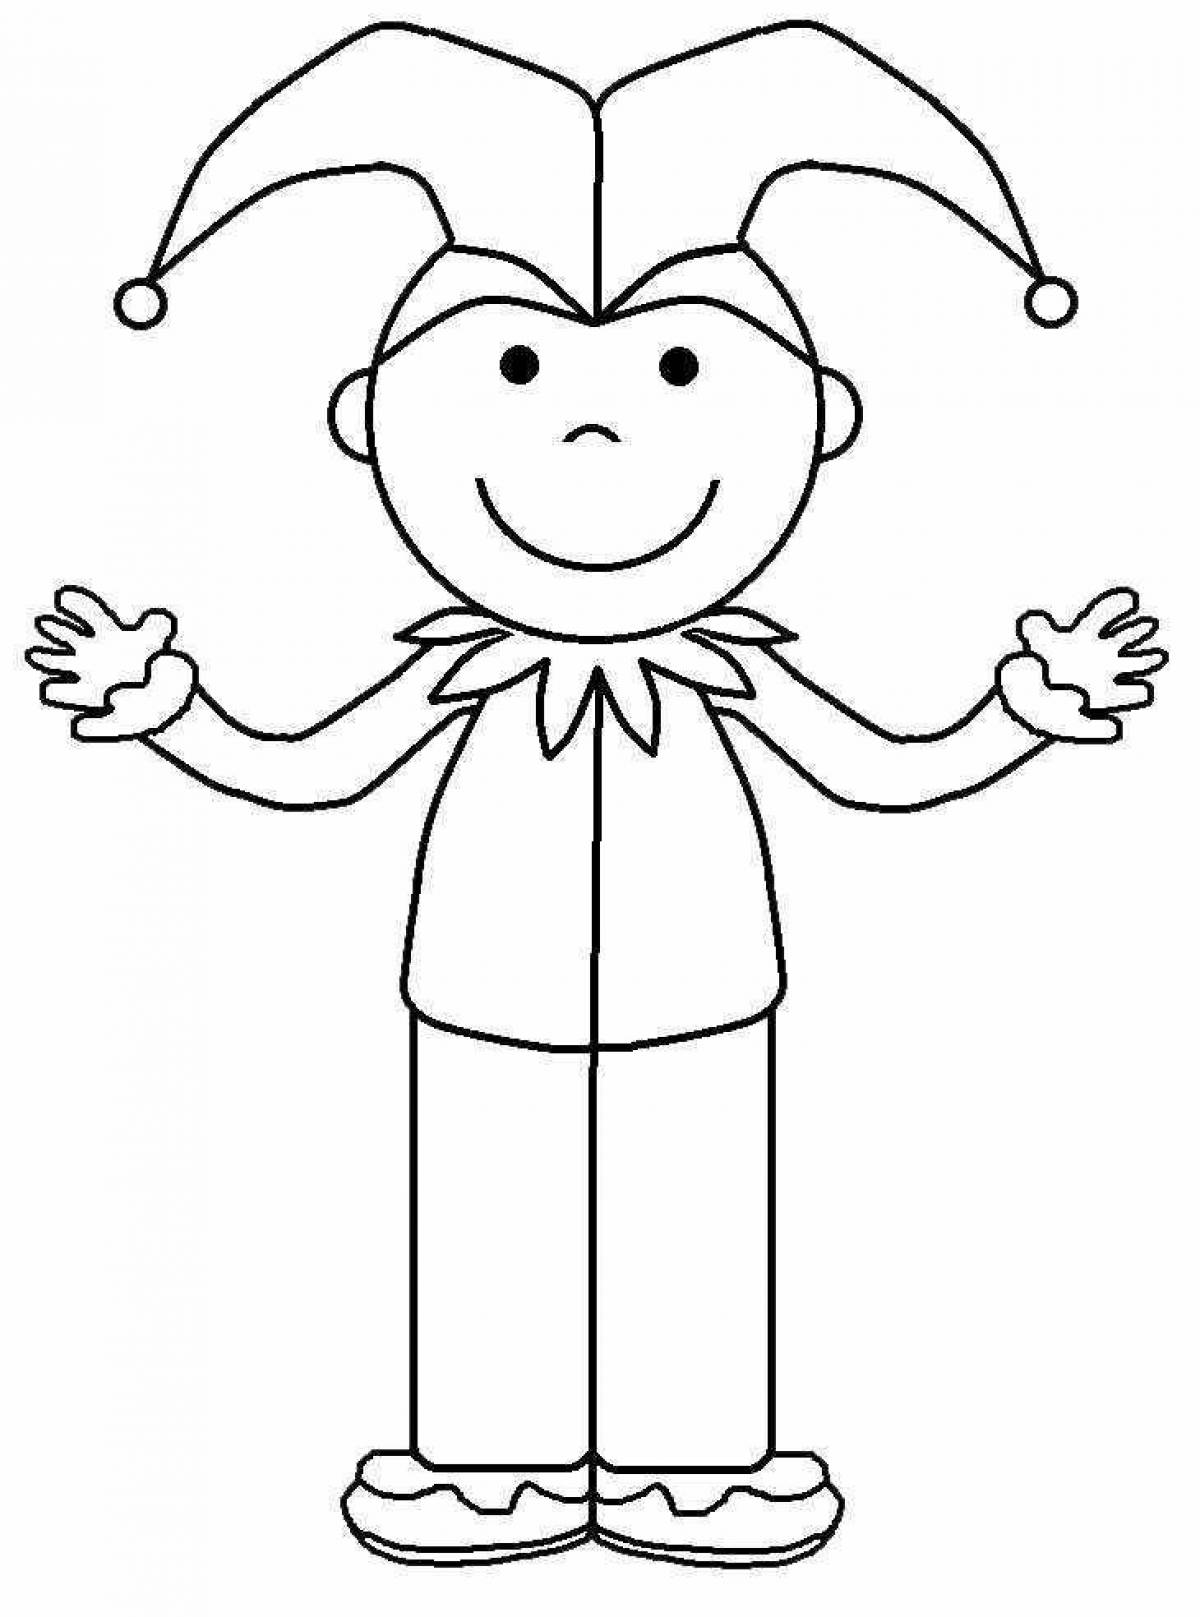 Playful baby parsley coloring page